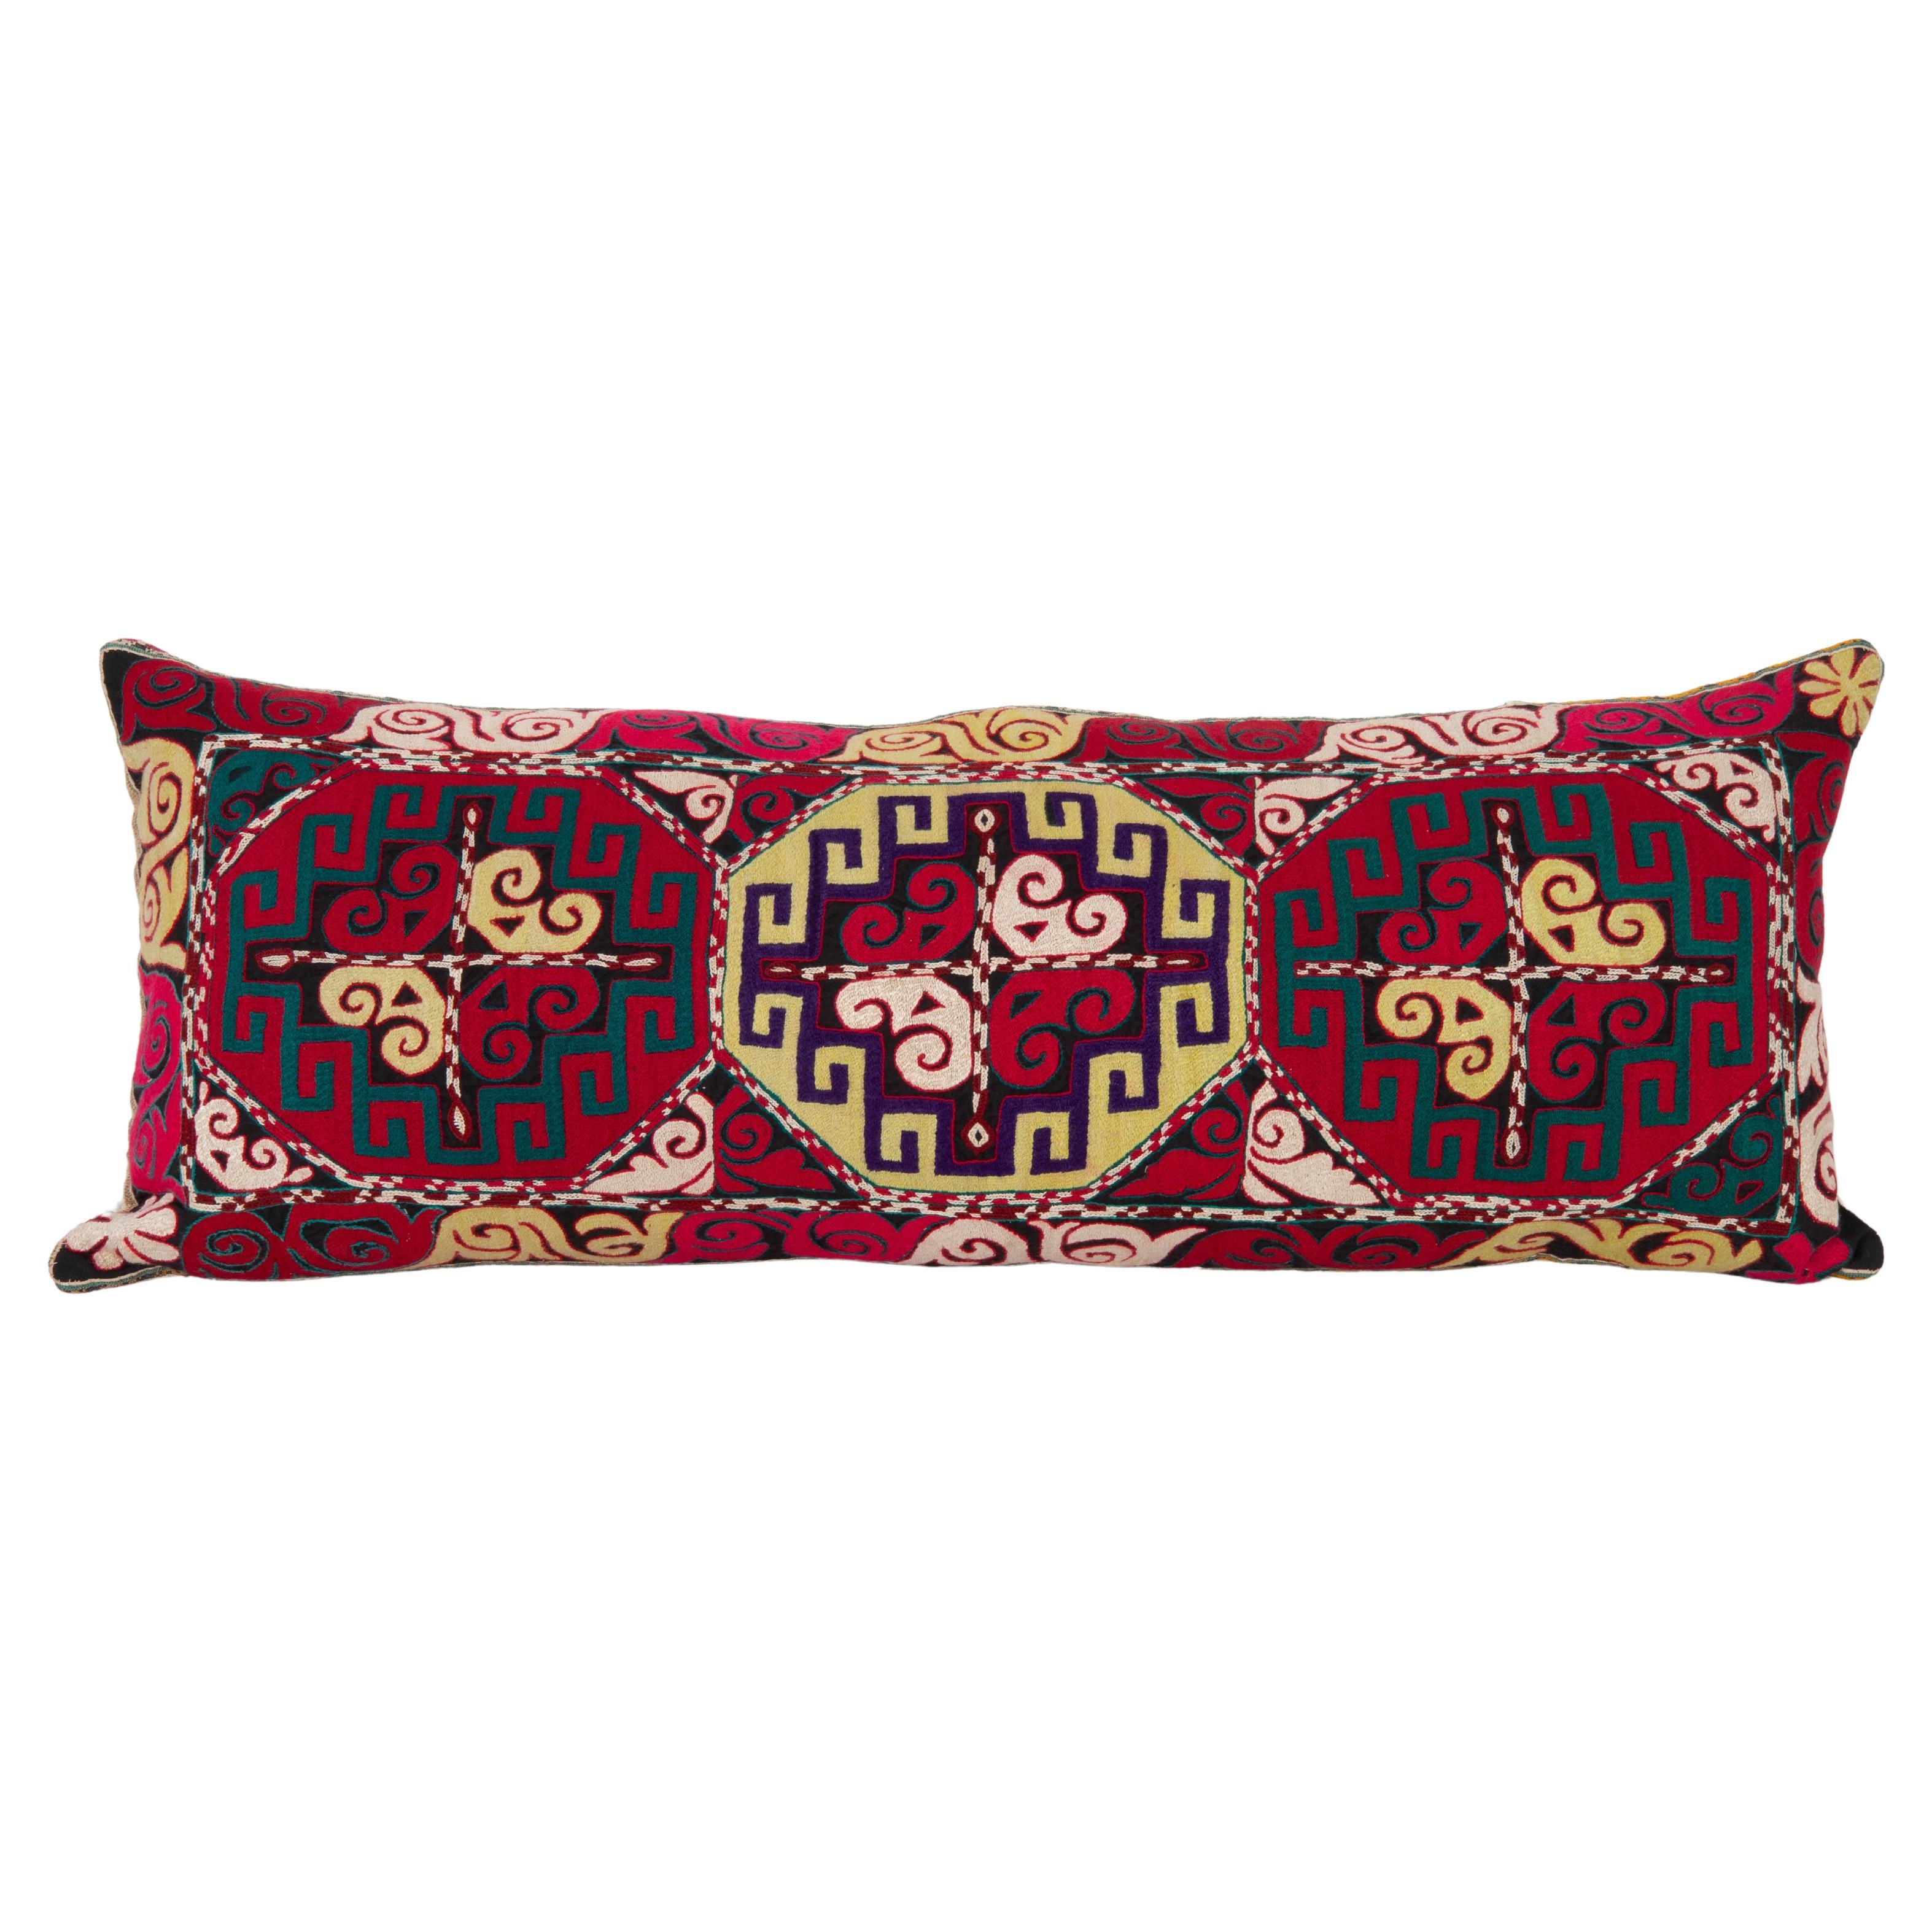 Pillow Cover, Made from a 1970s/80s silk mafrash ( storage bag ) Panel